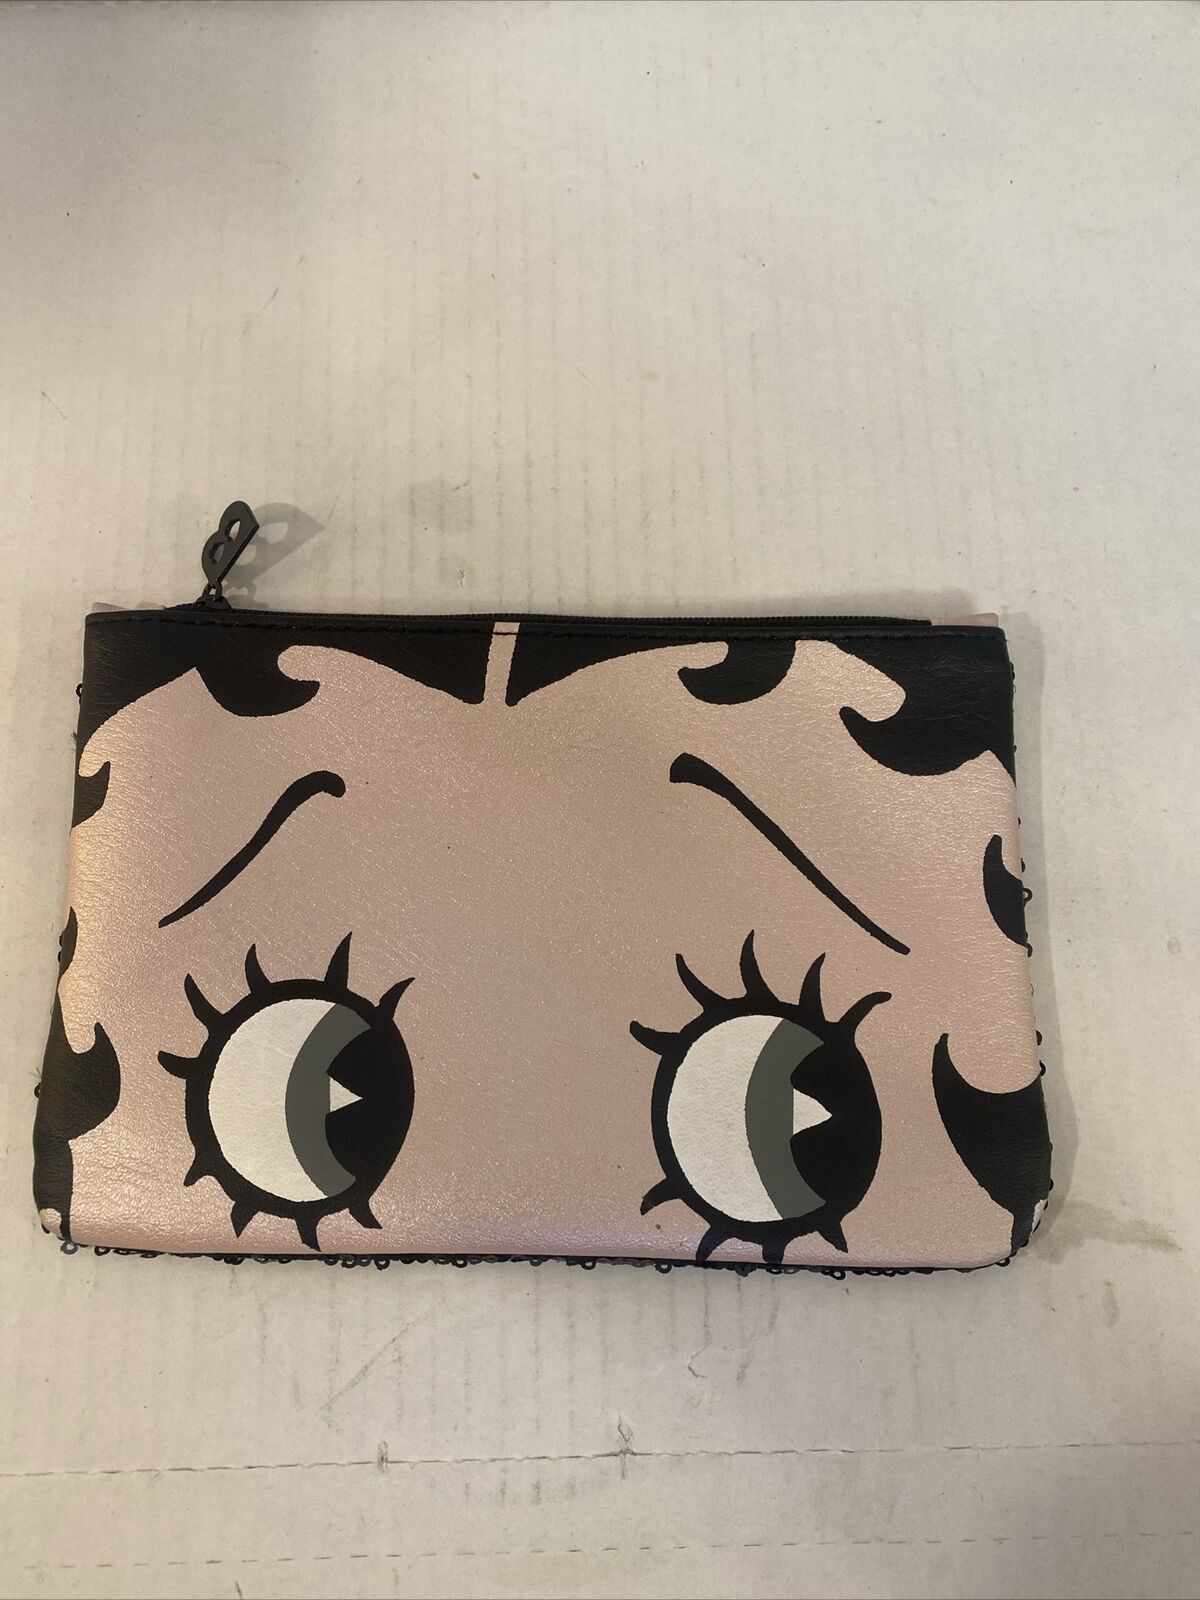 NWOT-Betty Boop ipsy Makeup Cosmetic Travel Bag Coin Purse Sequins 7.5 X 5